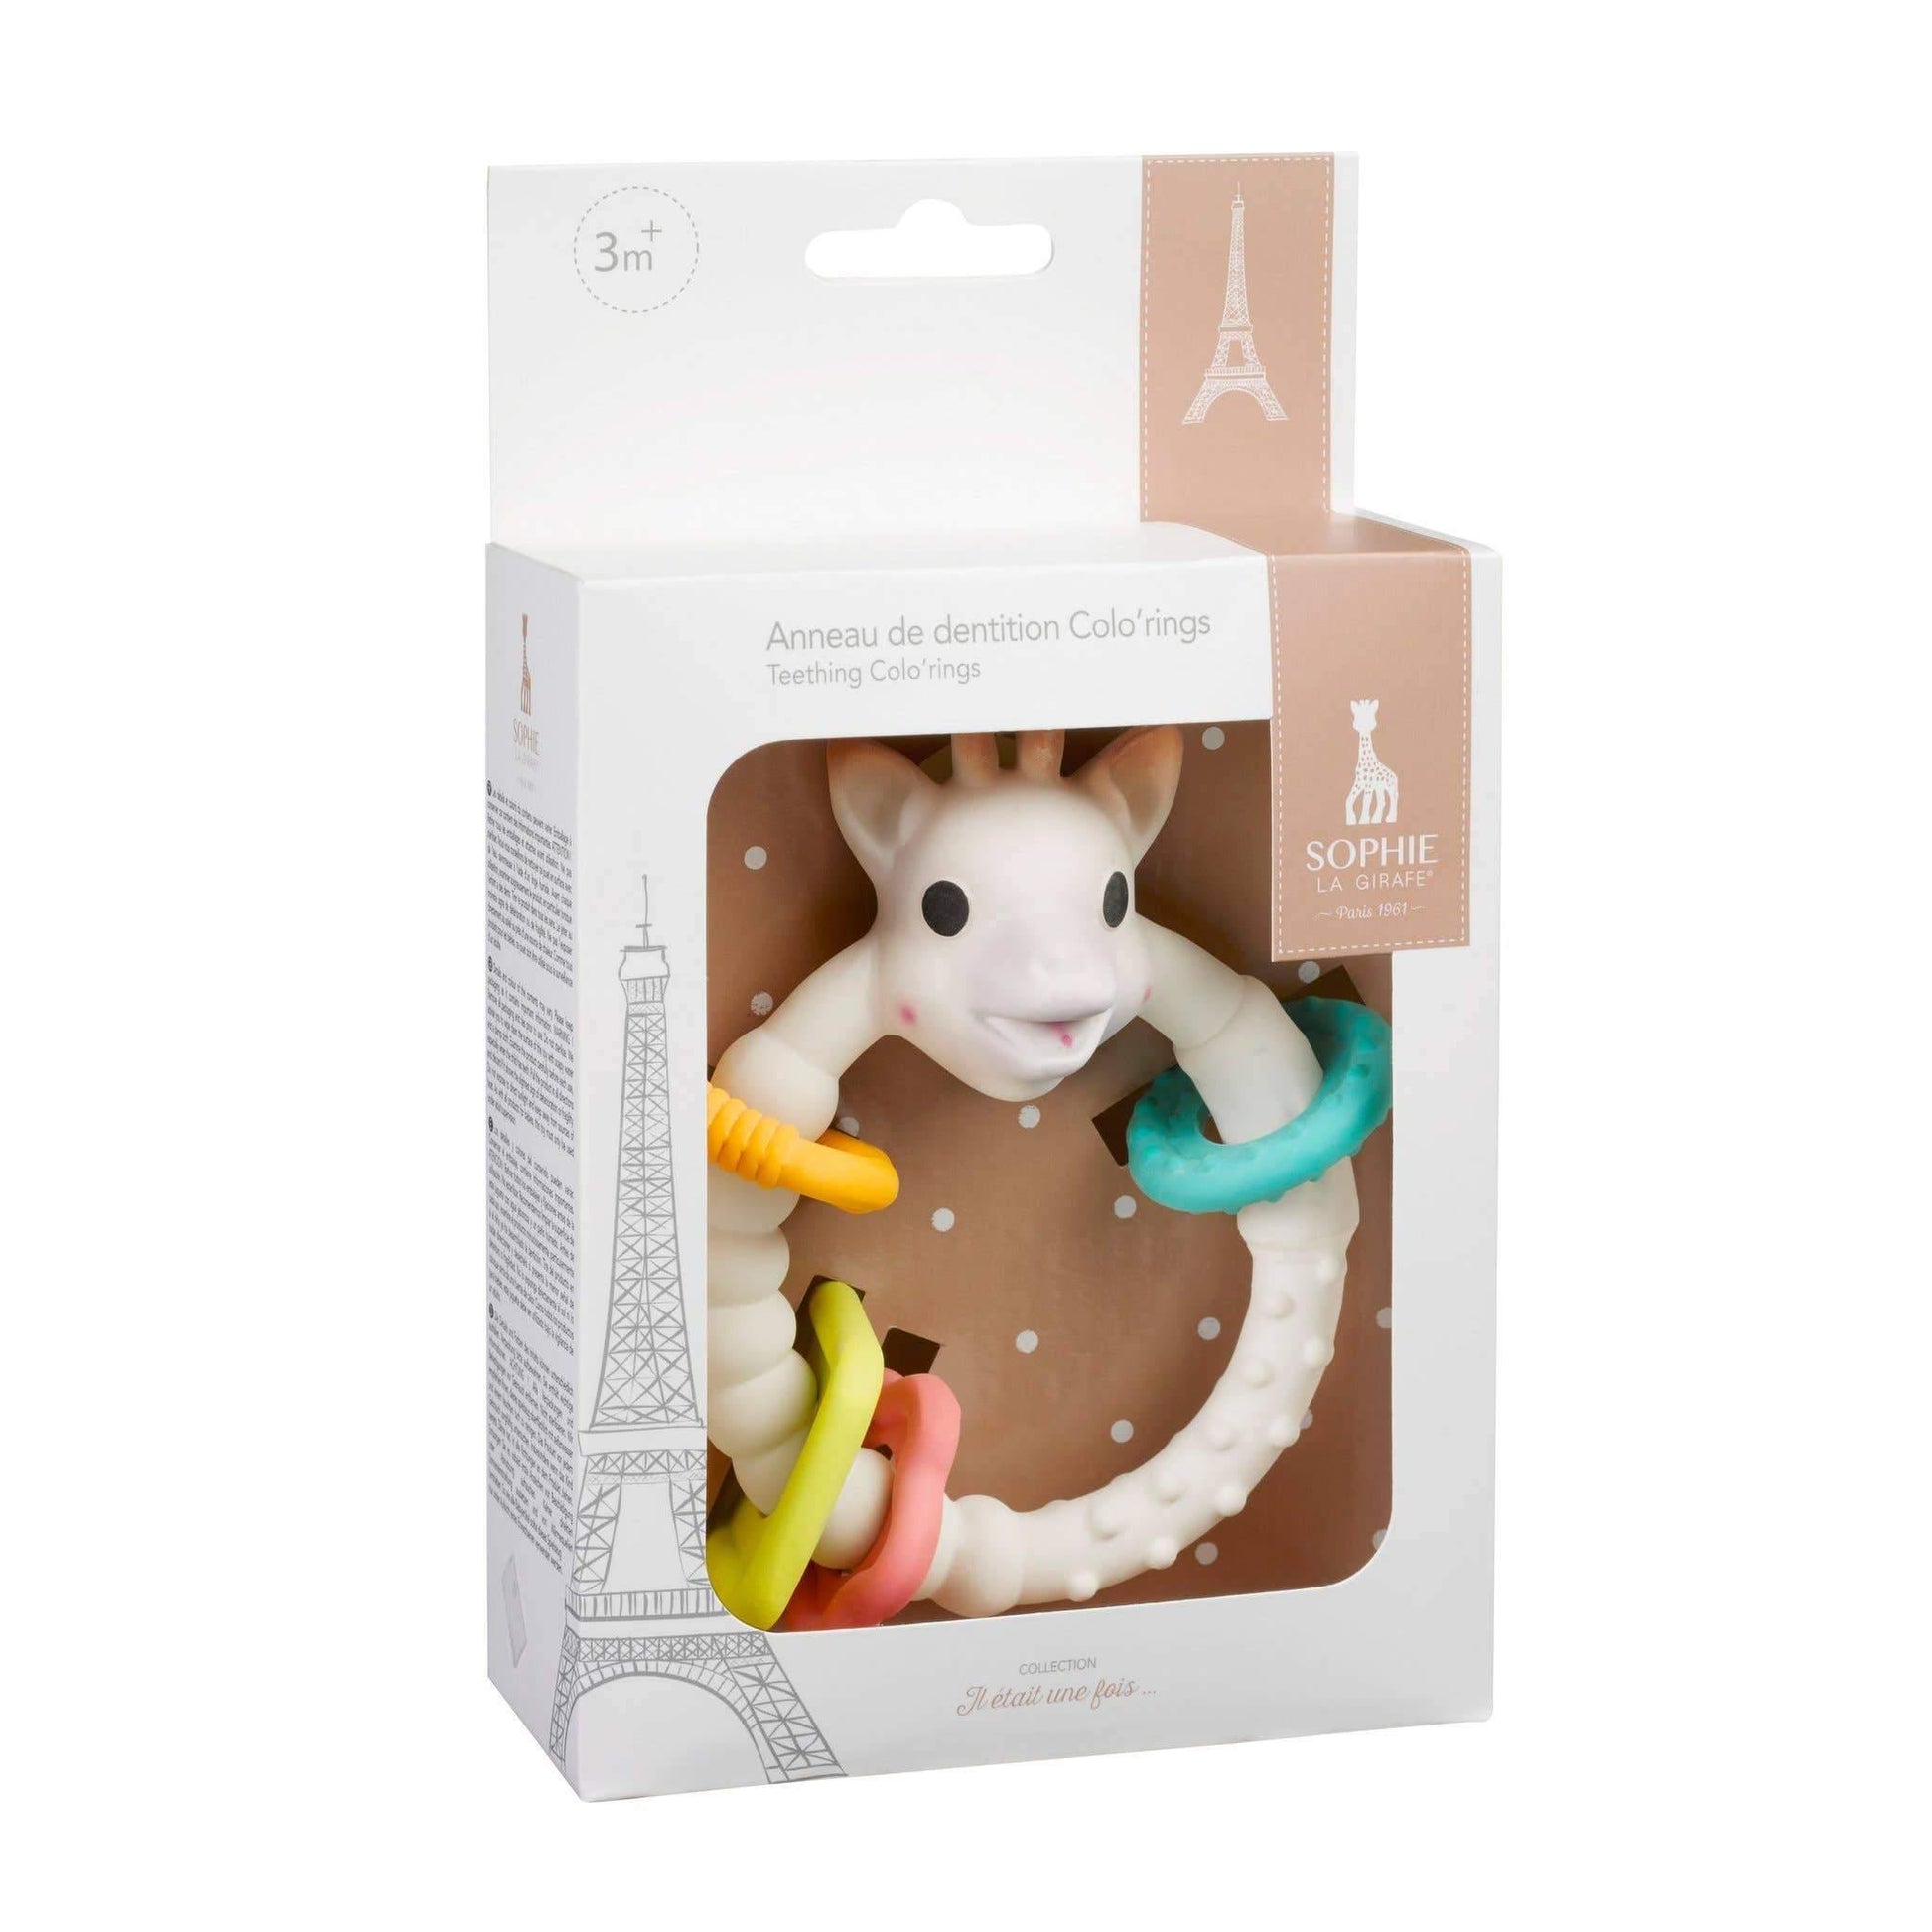 Sophie La Girafe White Classic Baby Teething Colo Ring product gift box shot for South Hous.